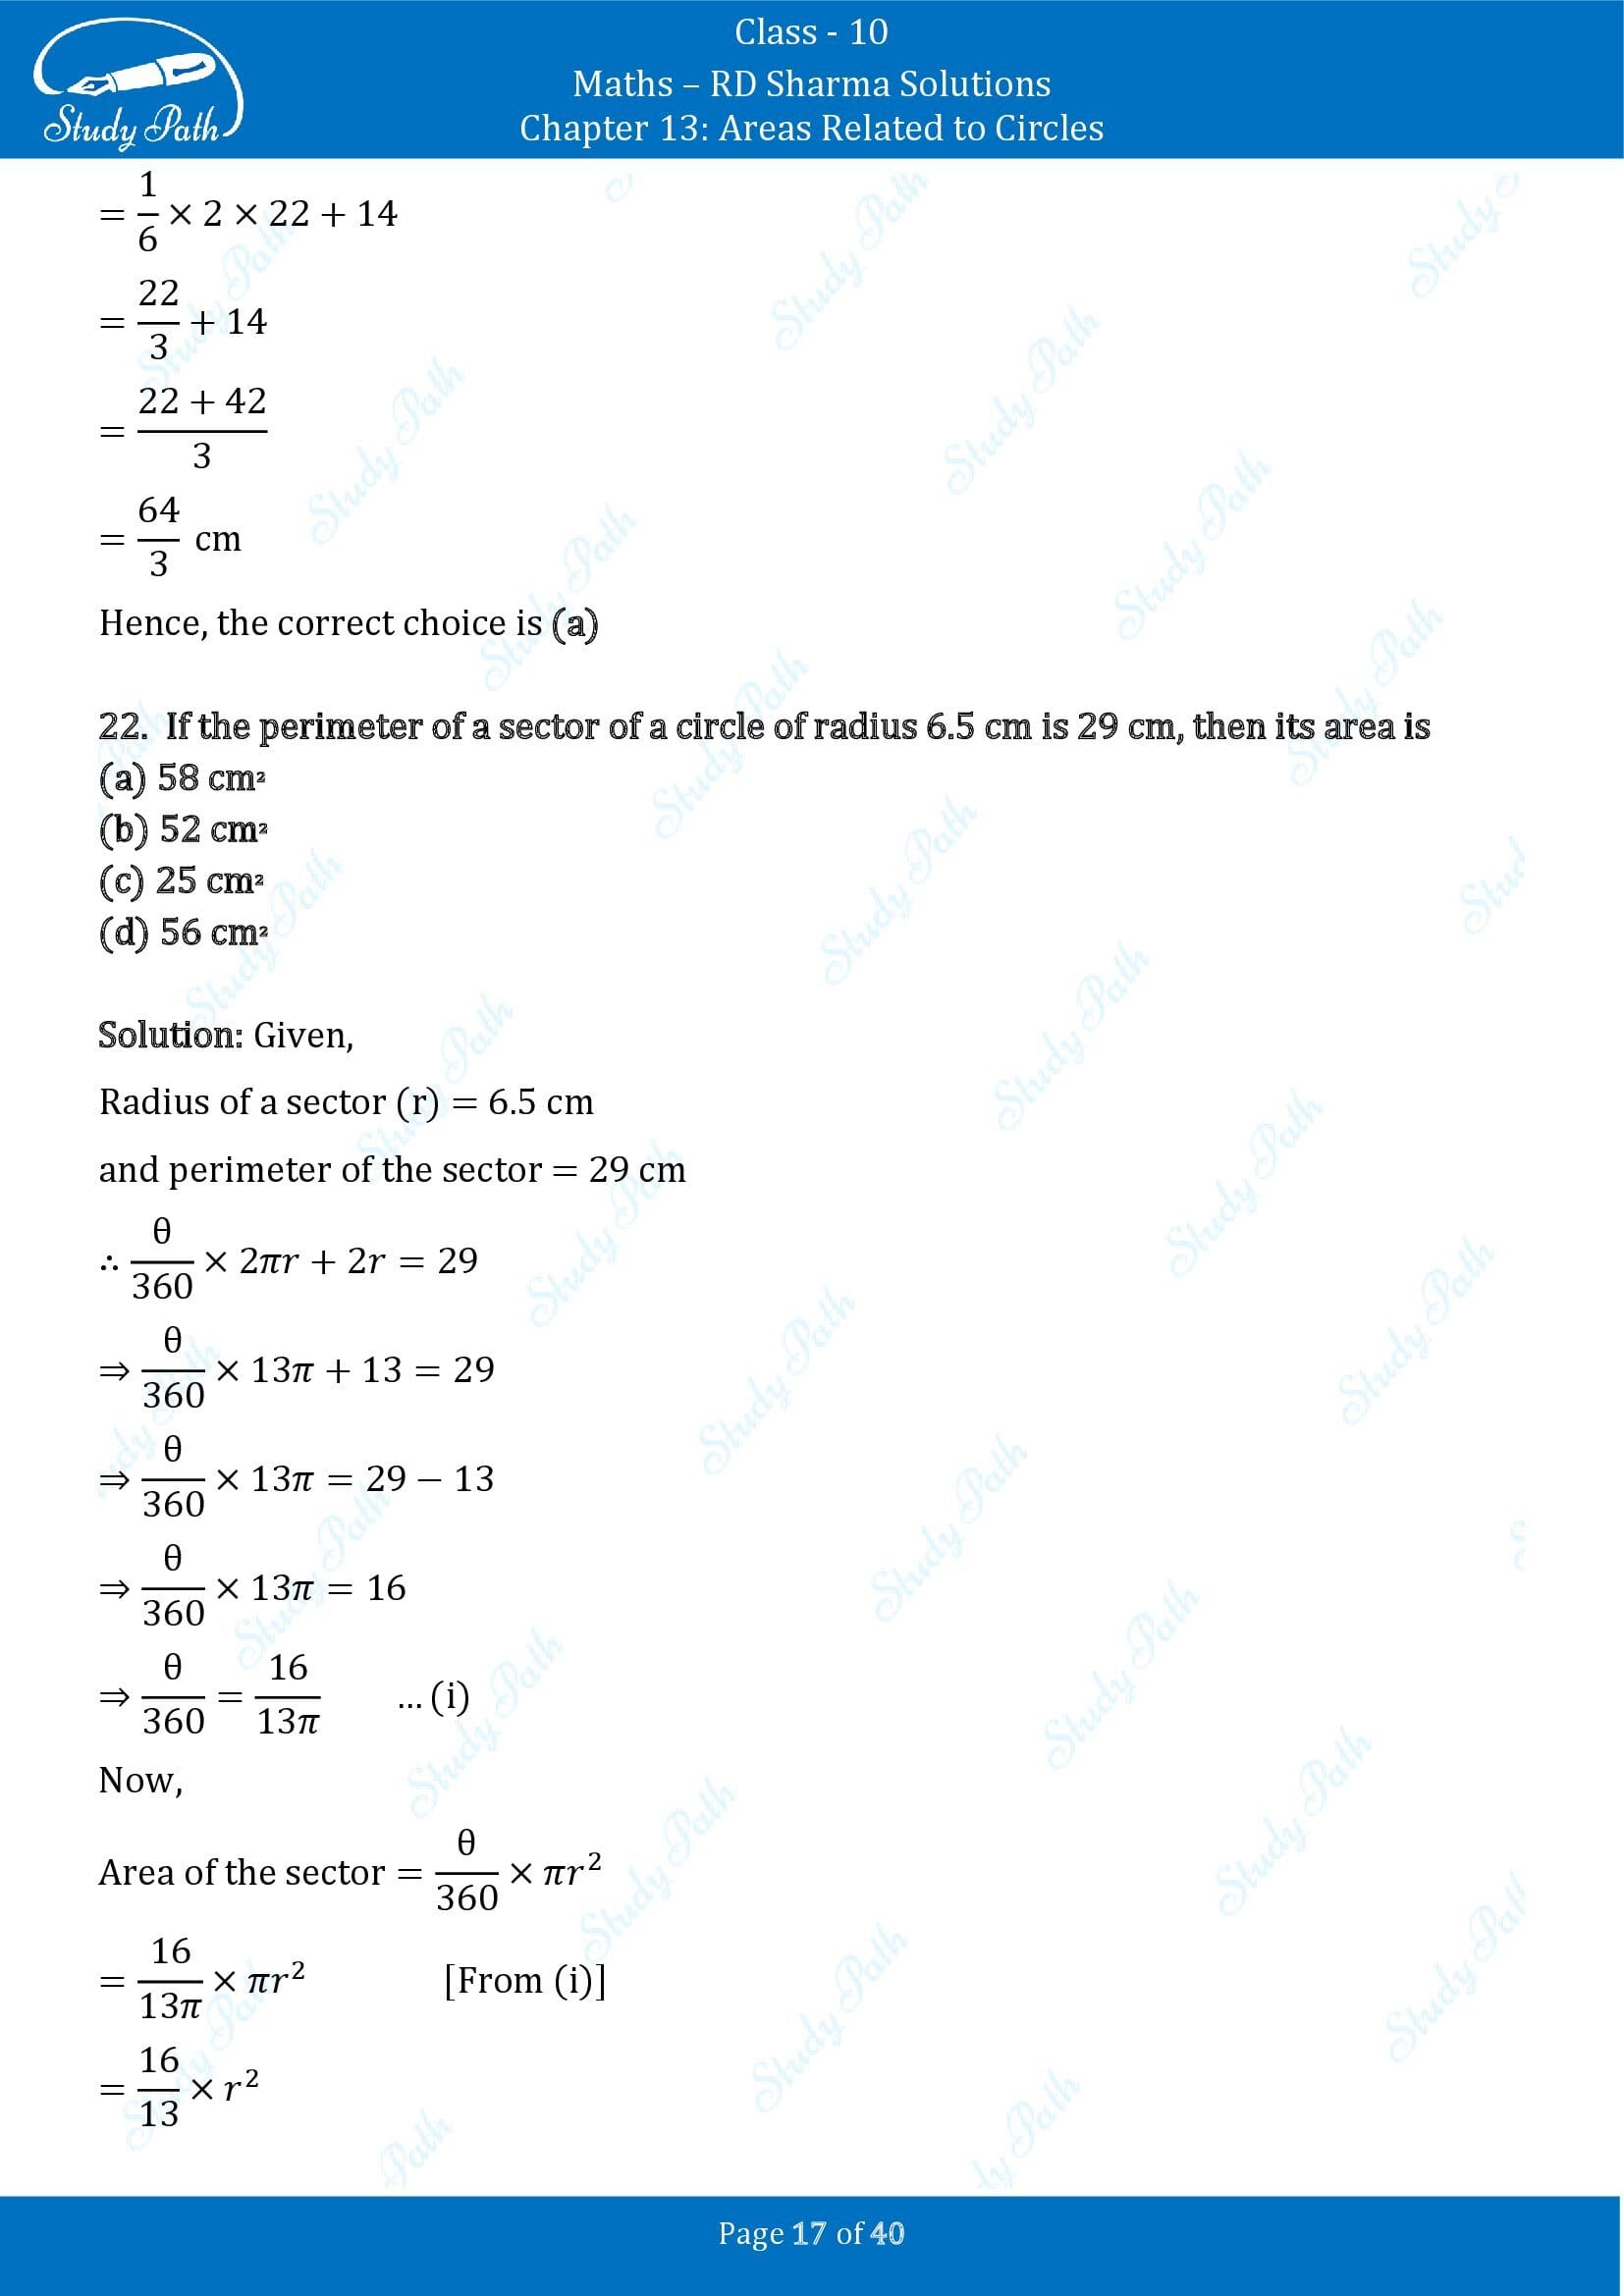 RD Sharma Solutions Class 10 Chapter 13 Areas Related to Circles Multiple Choice Question MCQs 00017